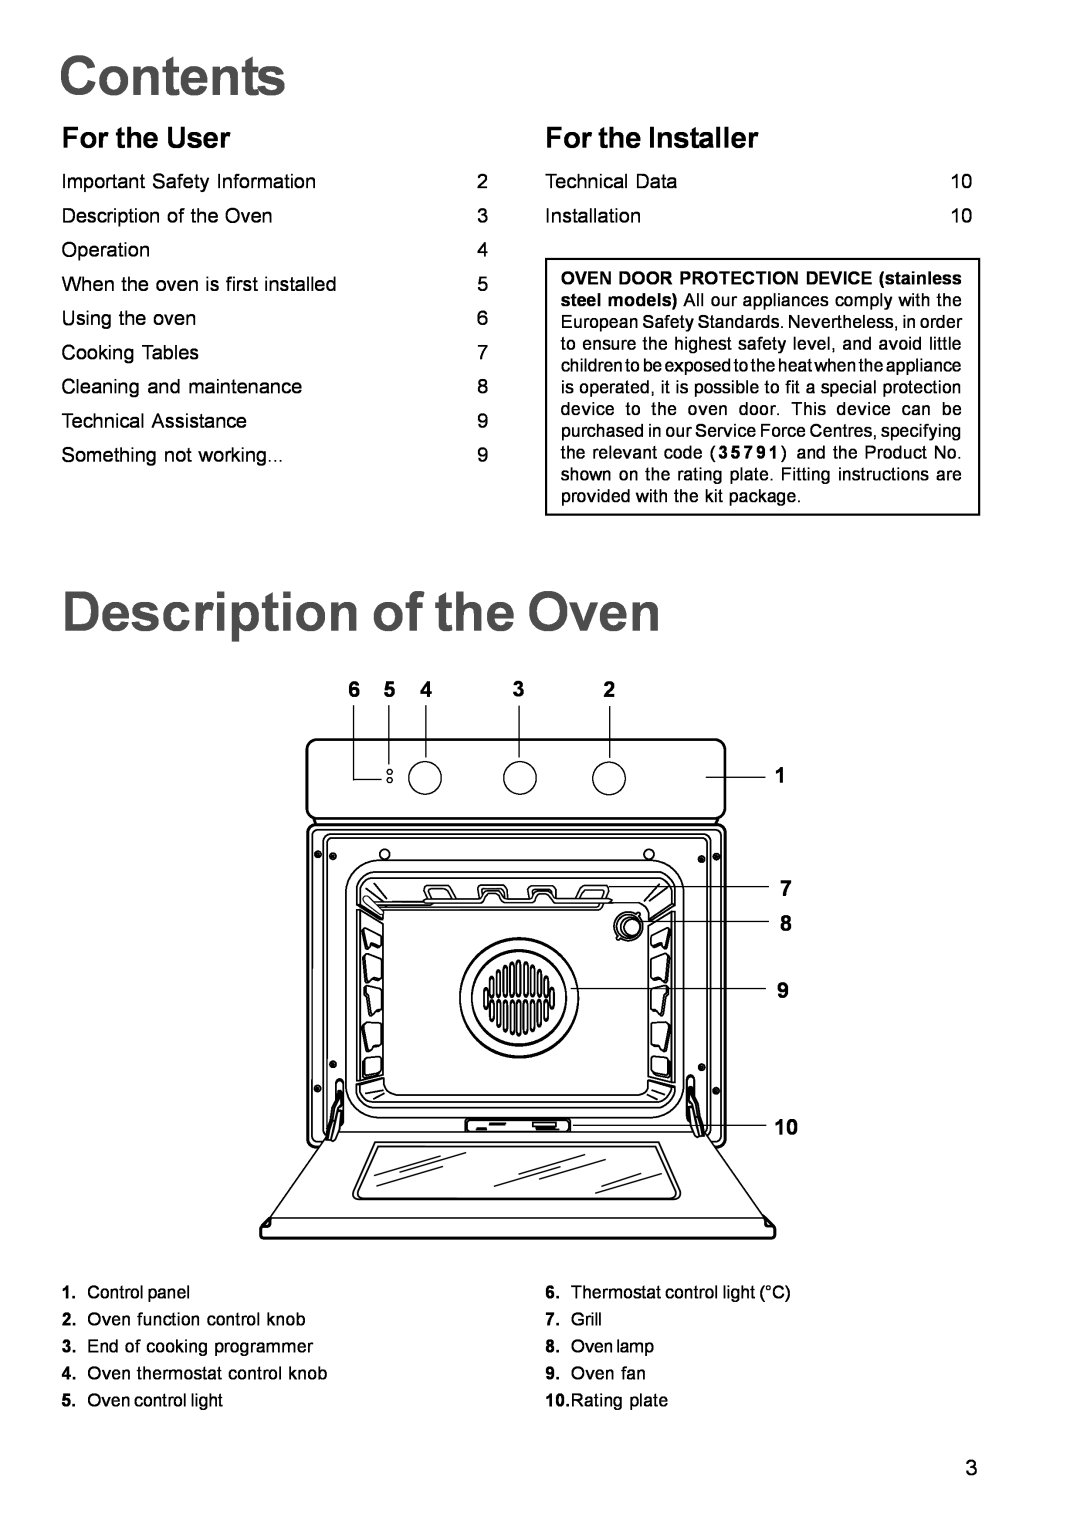 Zanussi ZOB 652, ZOB 641 manual Contents, Description of the Oven, For the User, For the Installer 